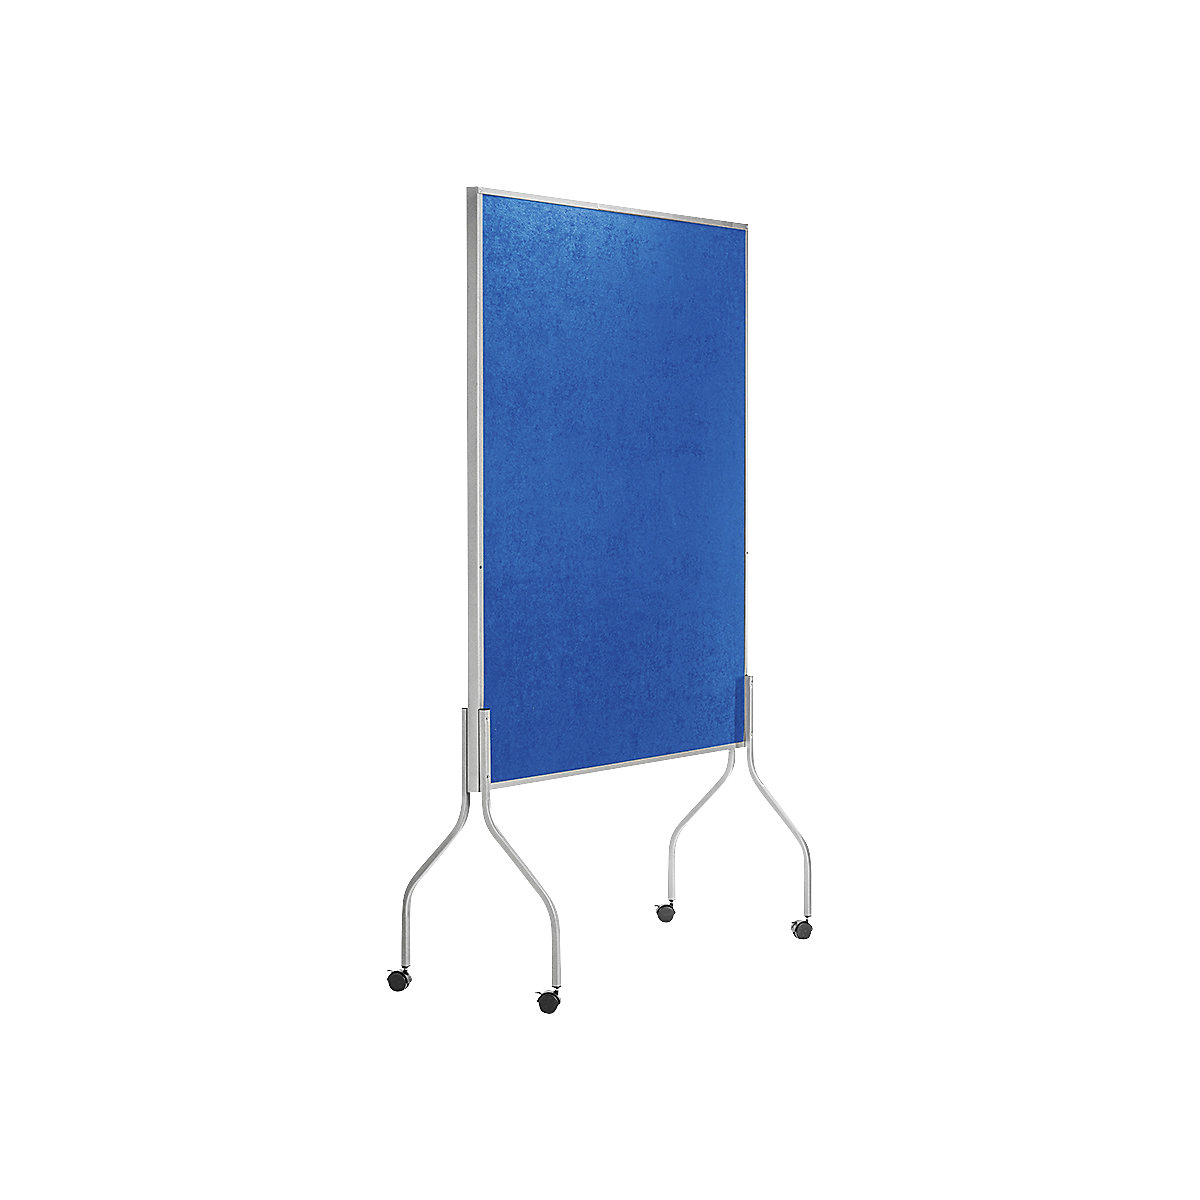 Mobile pinboard, HxWxD 1950 x 1200 x 680 mm, blue fabric cover-4